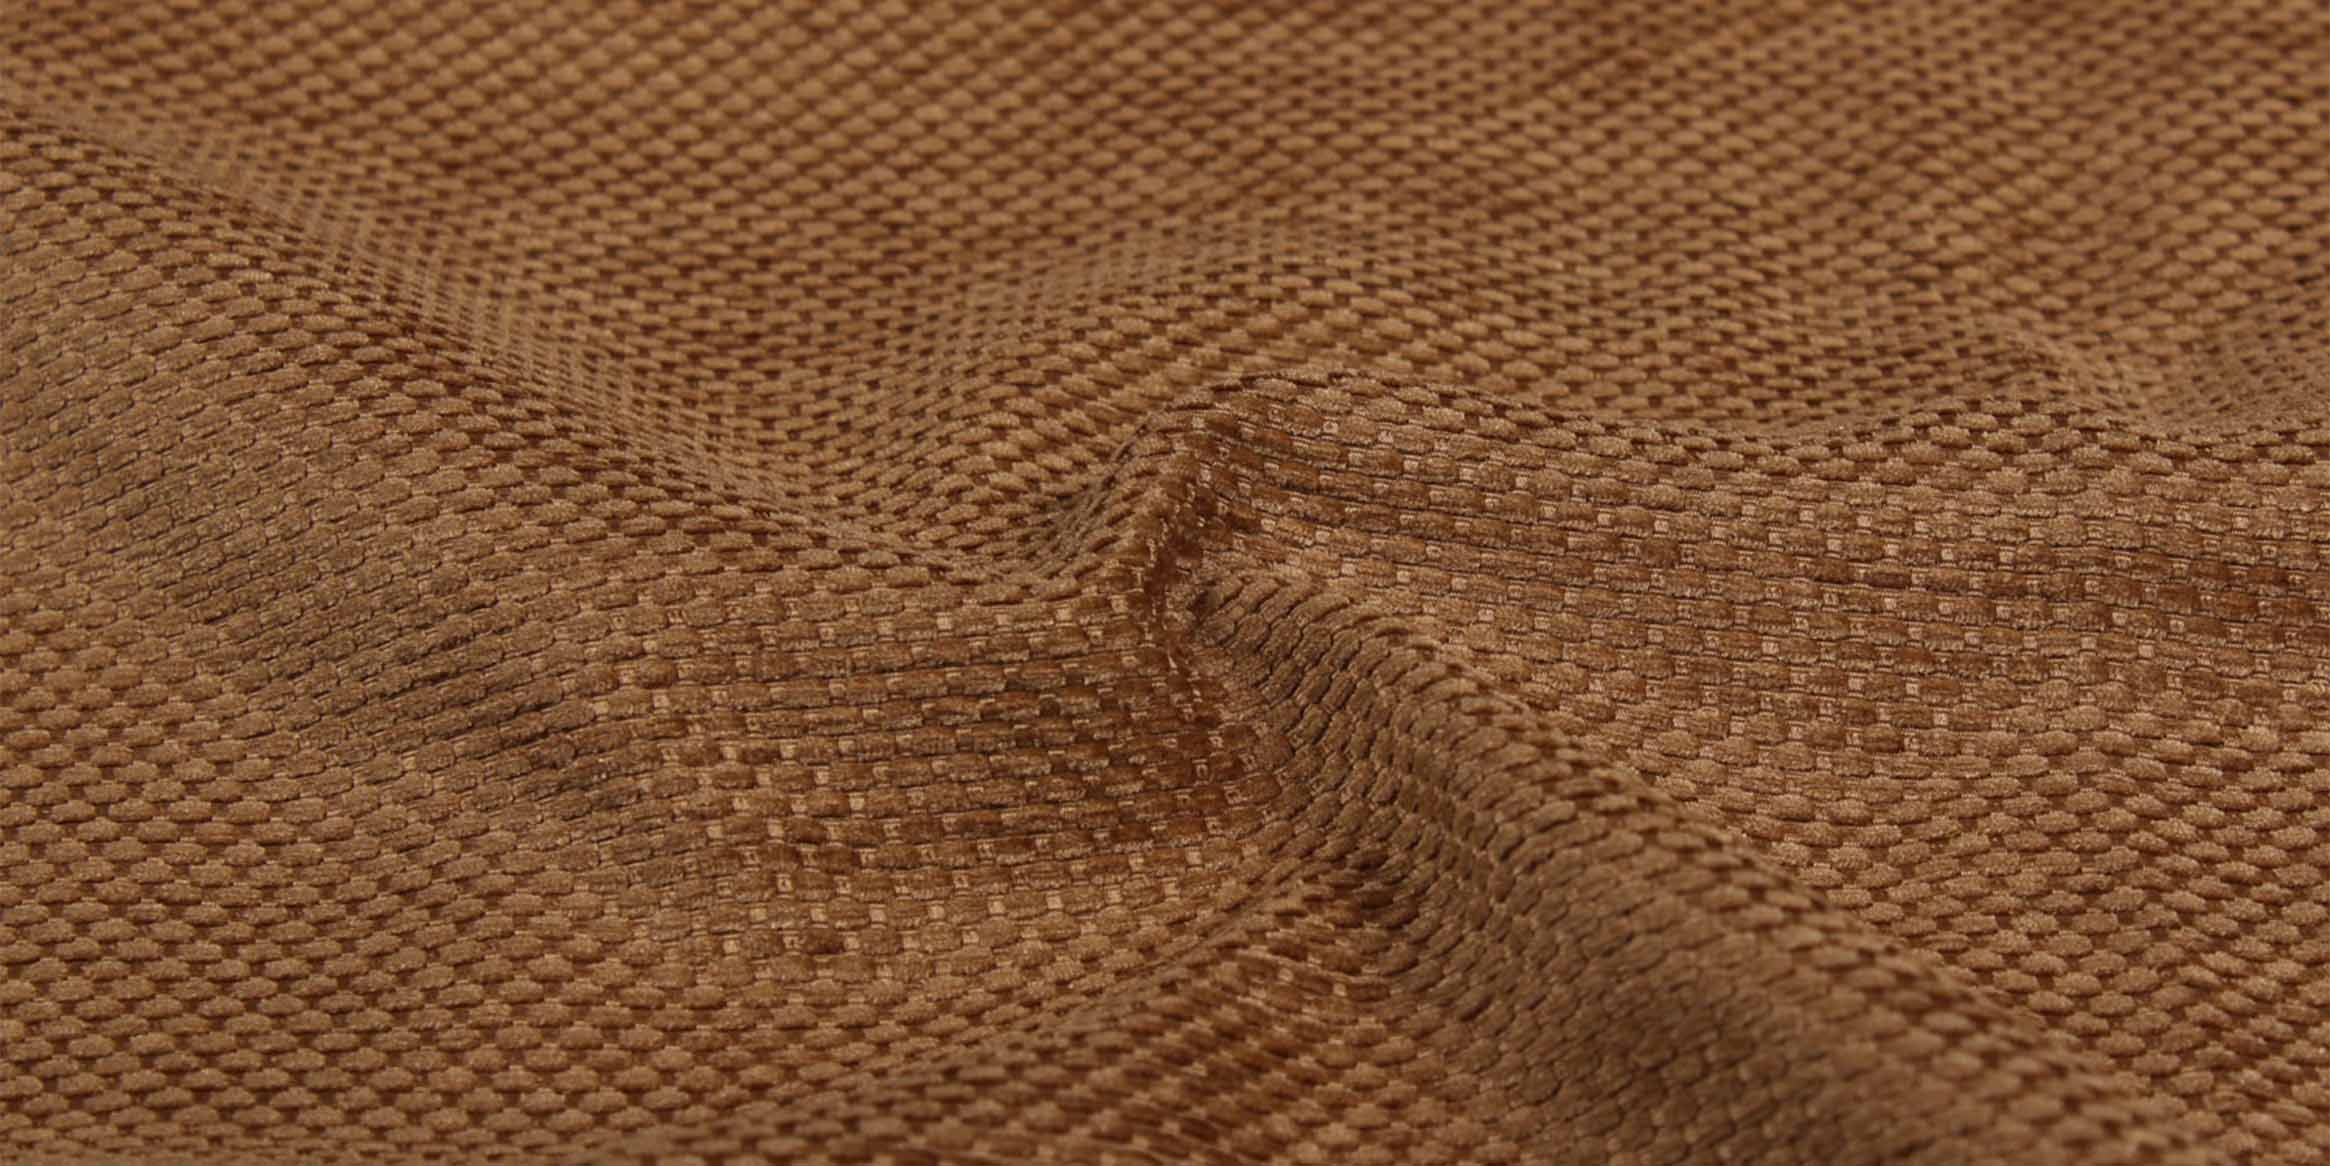 Chenille Fabric - Buy Chenille Upholstery Fabric Online at Best